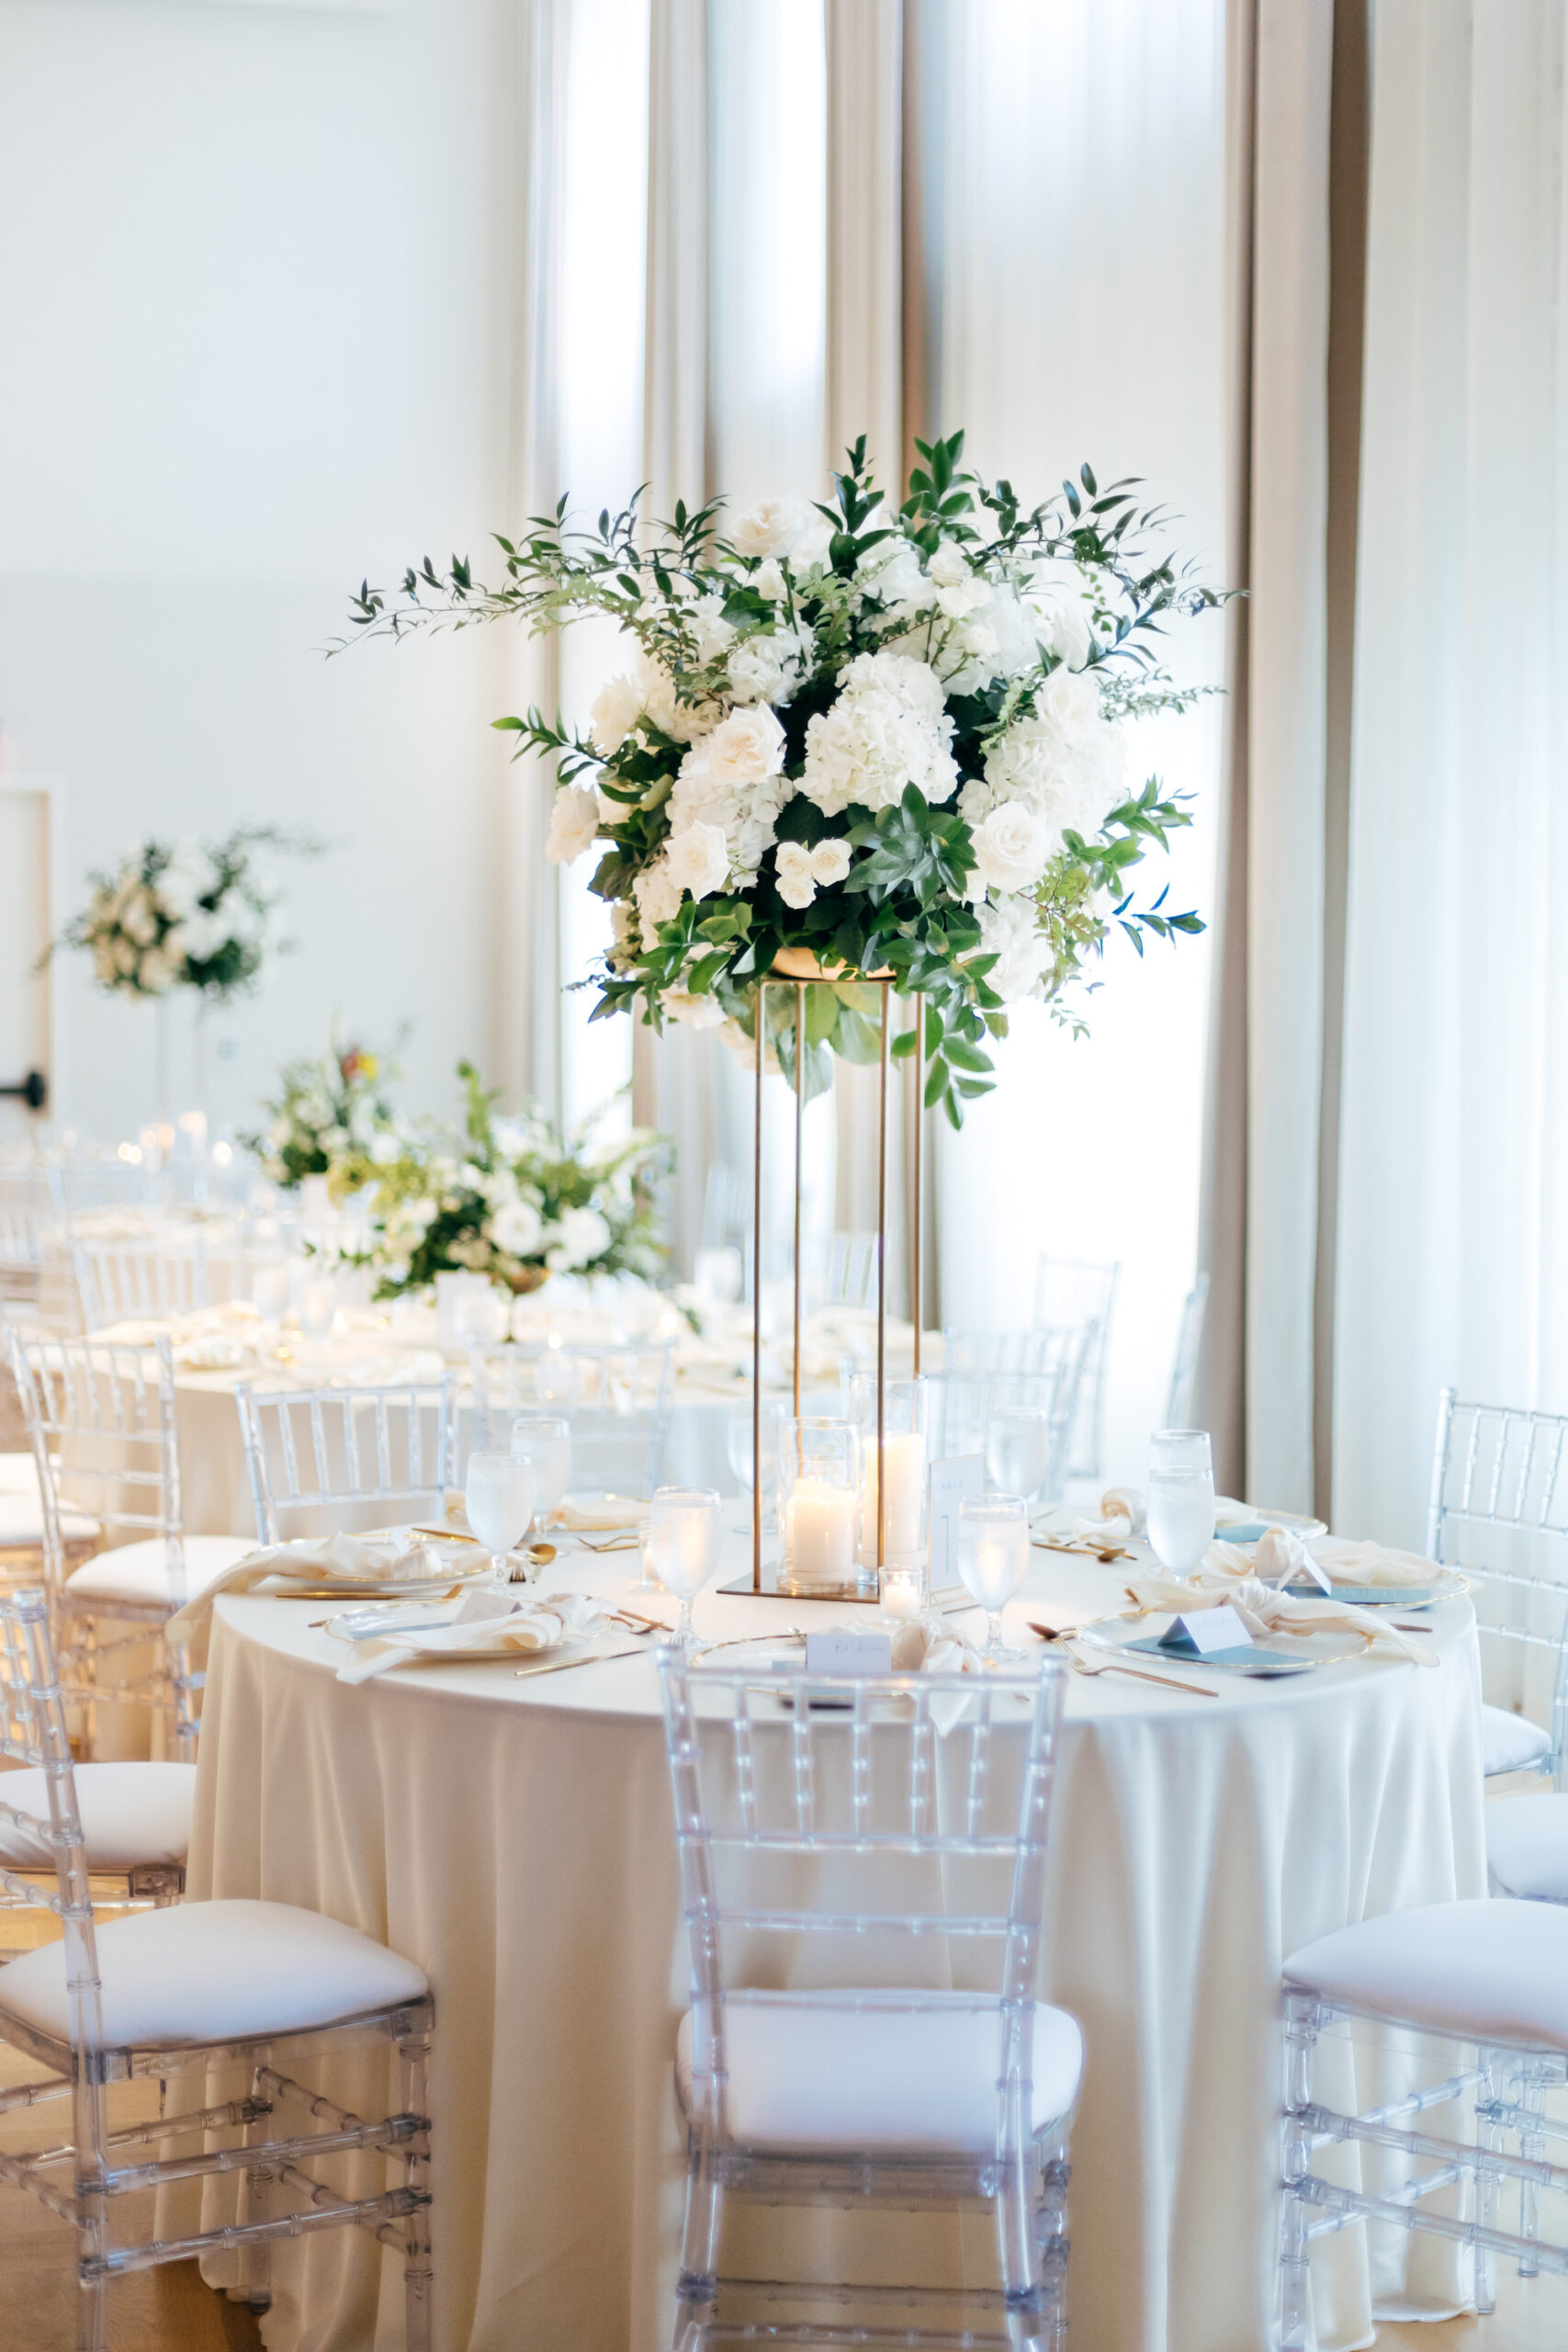 Romantic White and Green Table Centerpieces with Tall Gold Column Stand | Neutral Cream Linens | Tampa Bay Florist Bruce Wayne Florals